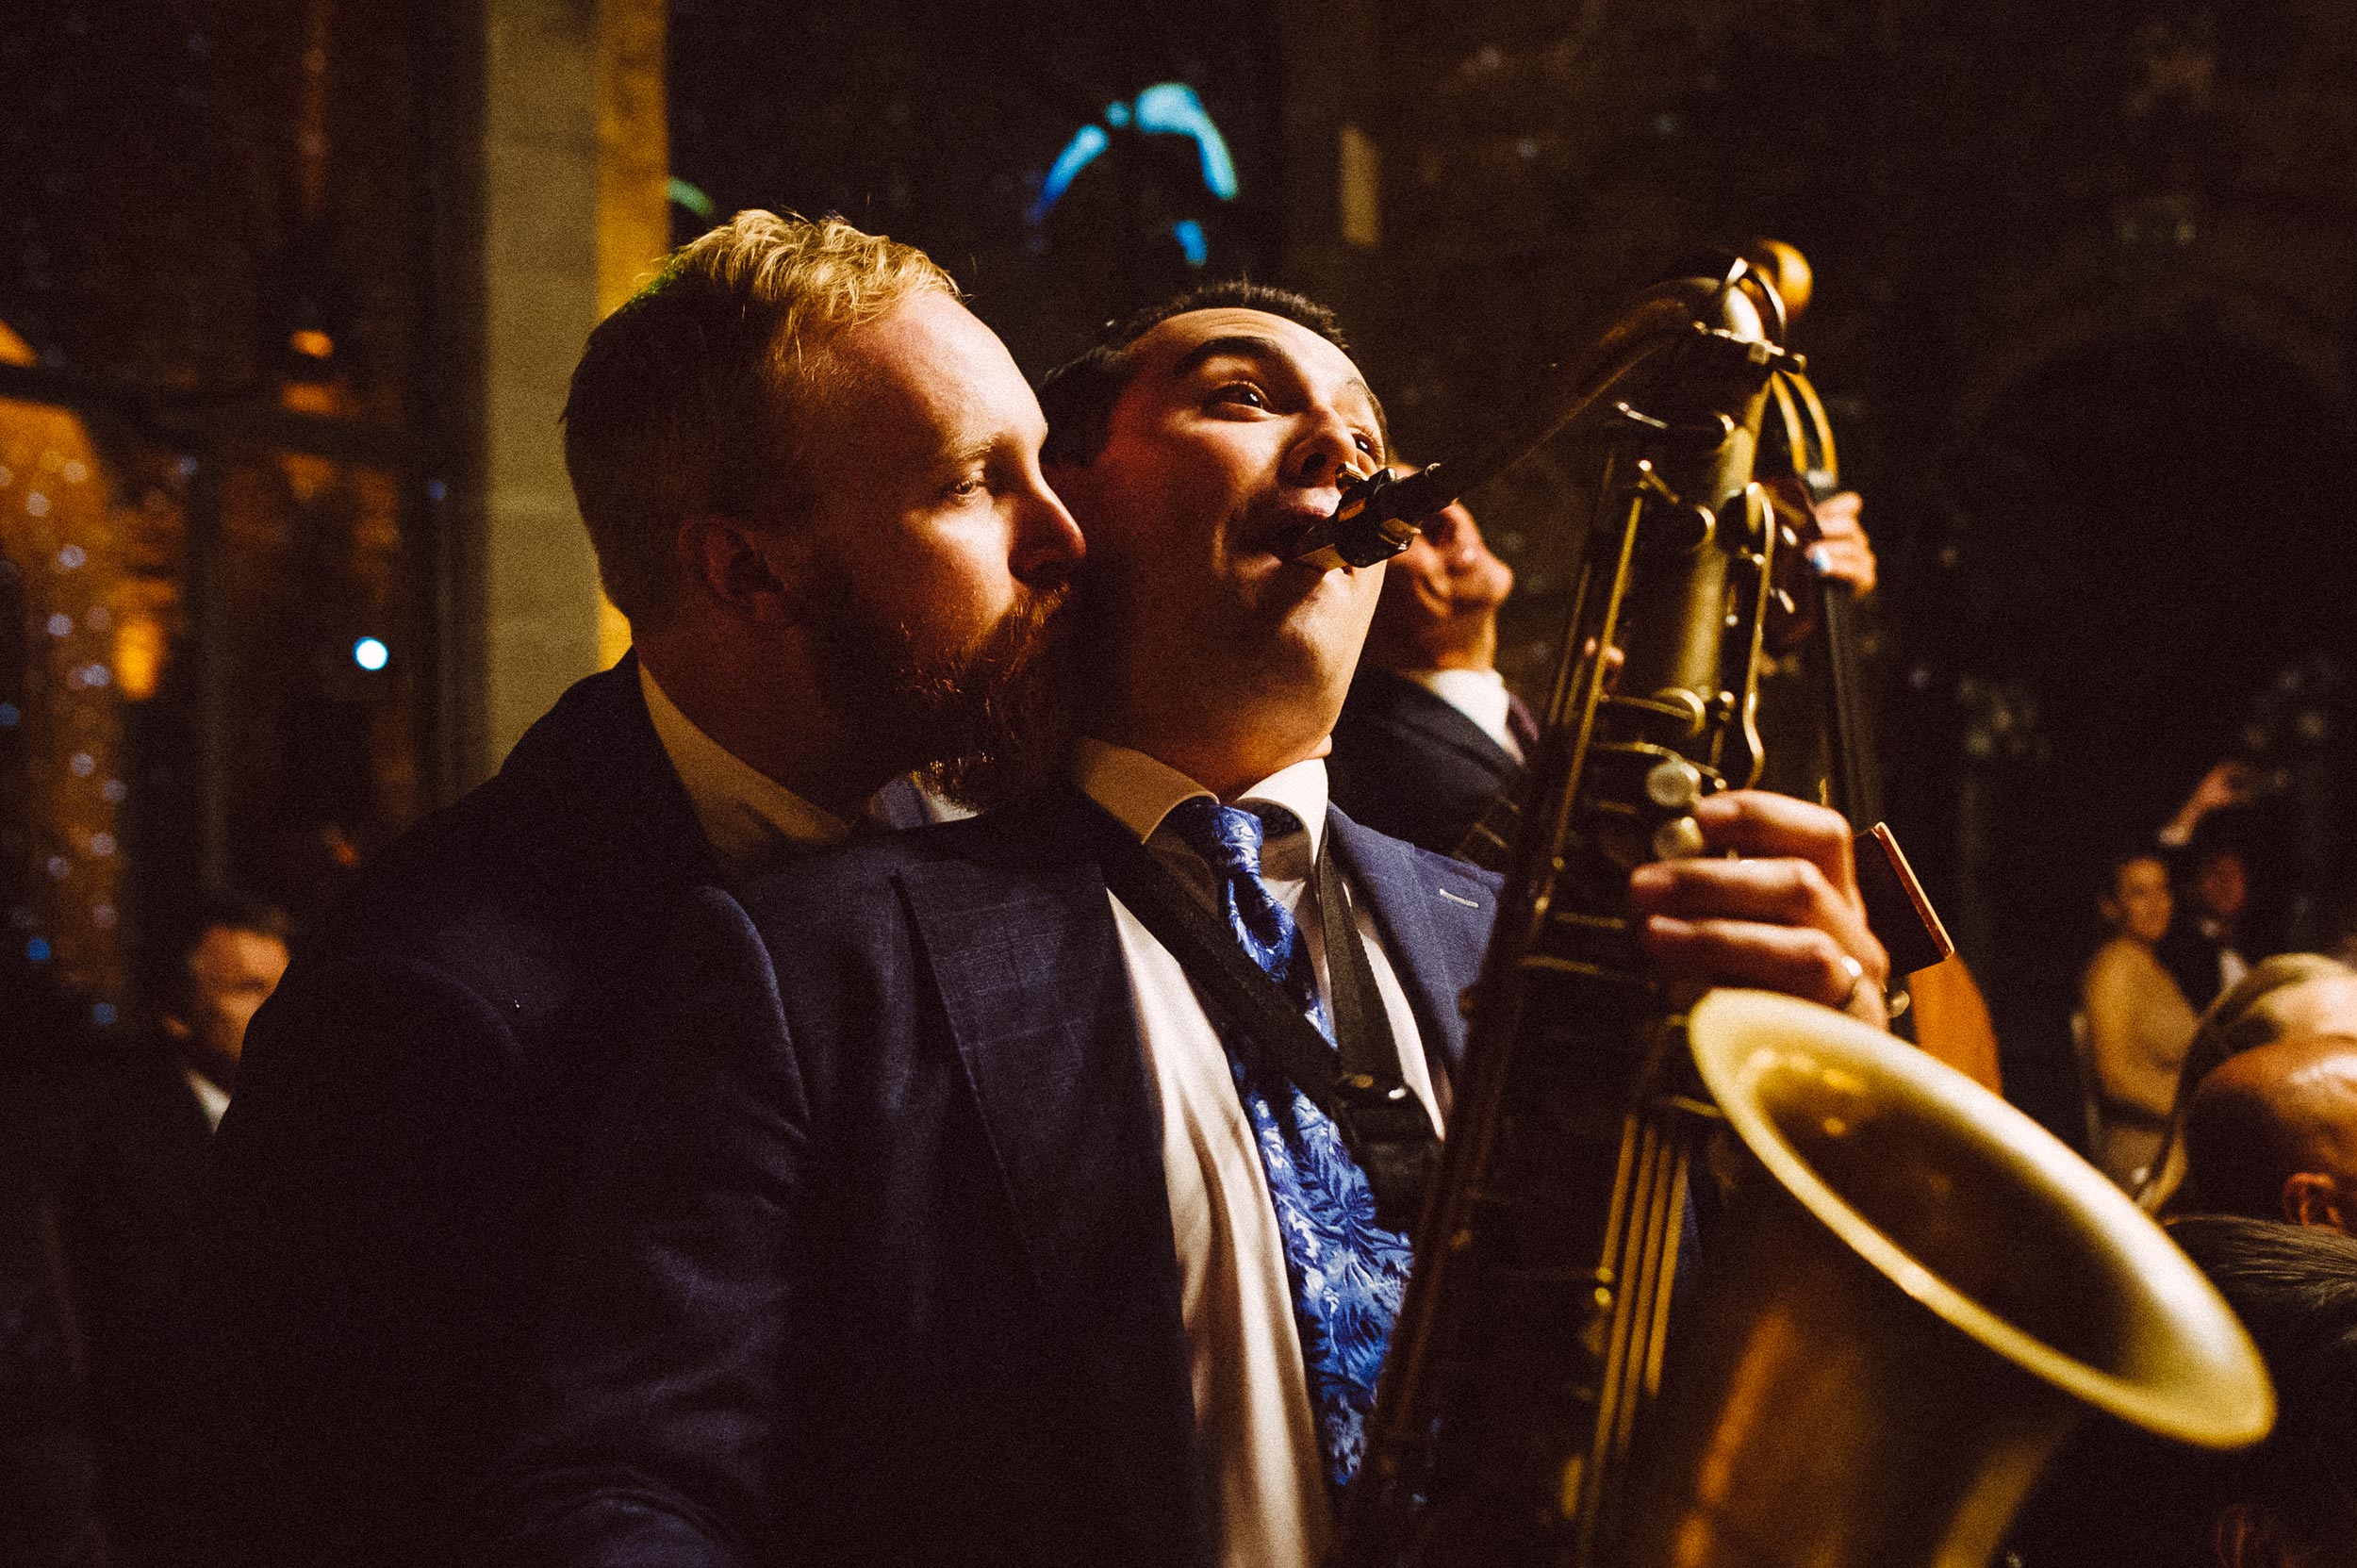 the-london-essentials-performing-in-tuscany-vincigliata-castle-documentary-wedding-photographer-Alessandro-Avenali.jpg